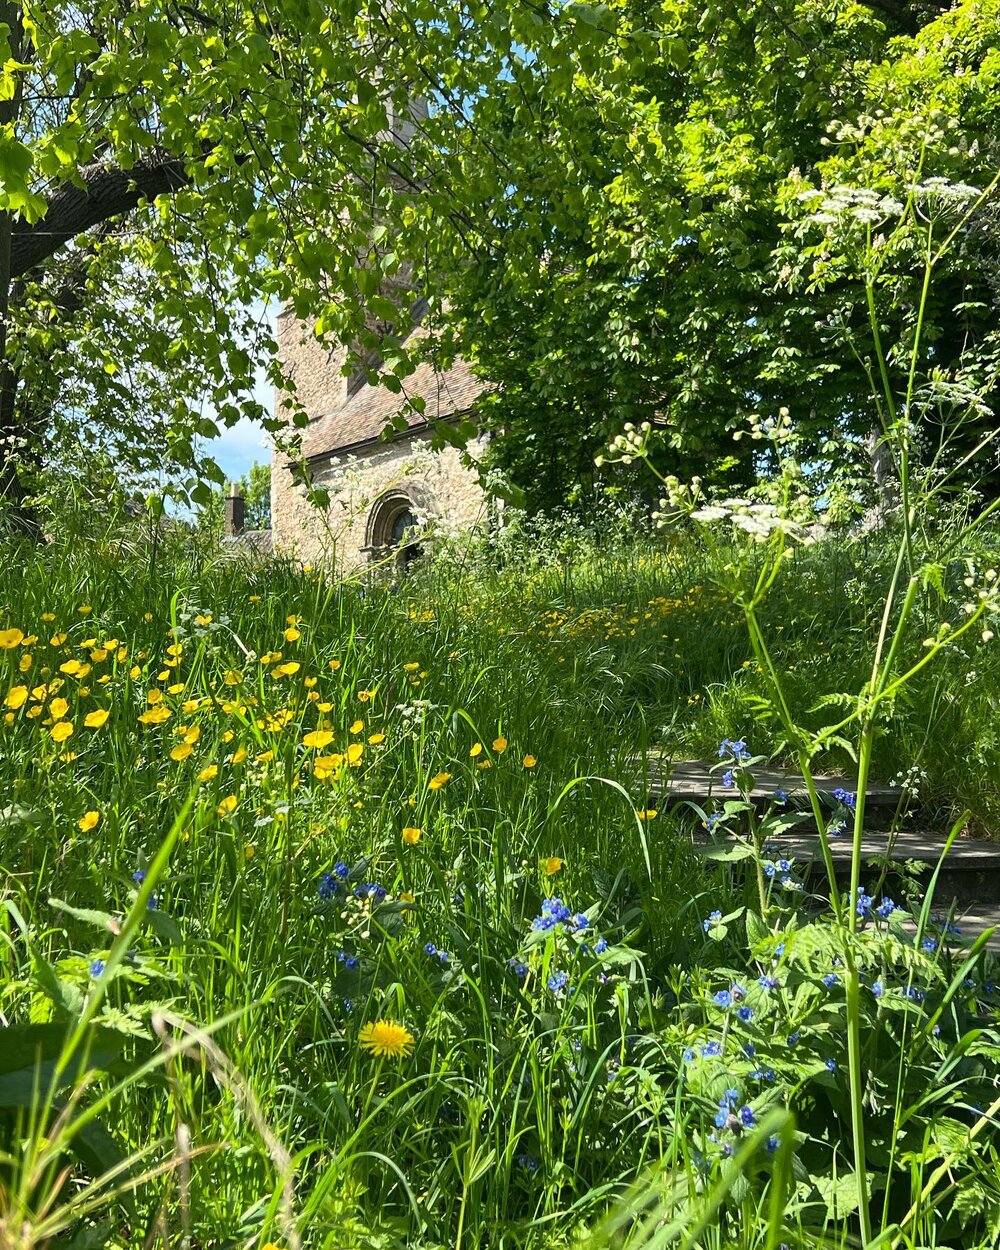 KETTLES YARD

A perfect, sunny, warm May day to visit @kettlesyard in Cambridge (quite possibly the most relentlessly English, artsy-Fabian-bourgeois place I&rsquo;ve ever been&hellip; EVEN ALDEBURGH!)

Good old Leslie Martin though. Such a lovely in